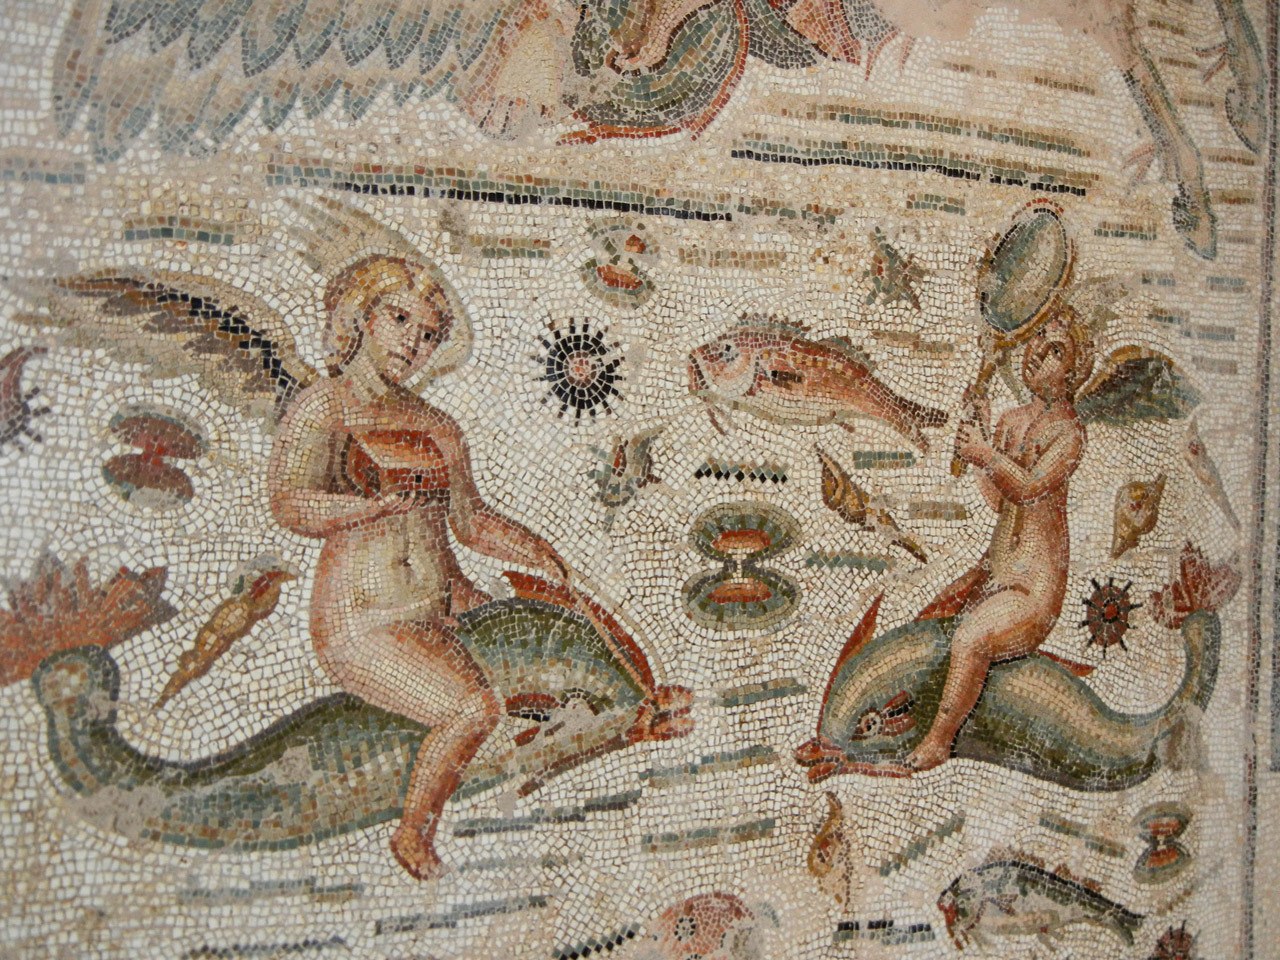 The Bardo Museum has a fantastic collection of Roman mosaics taken from the various sites in the country.